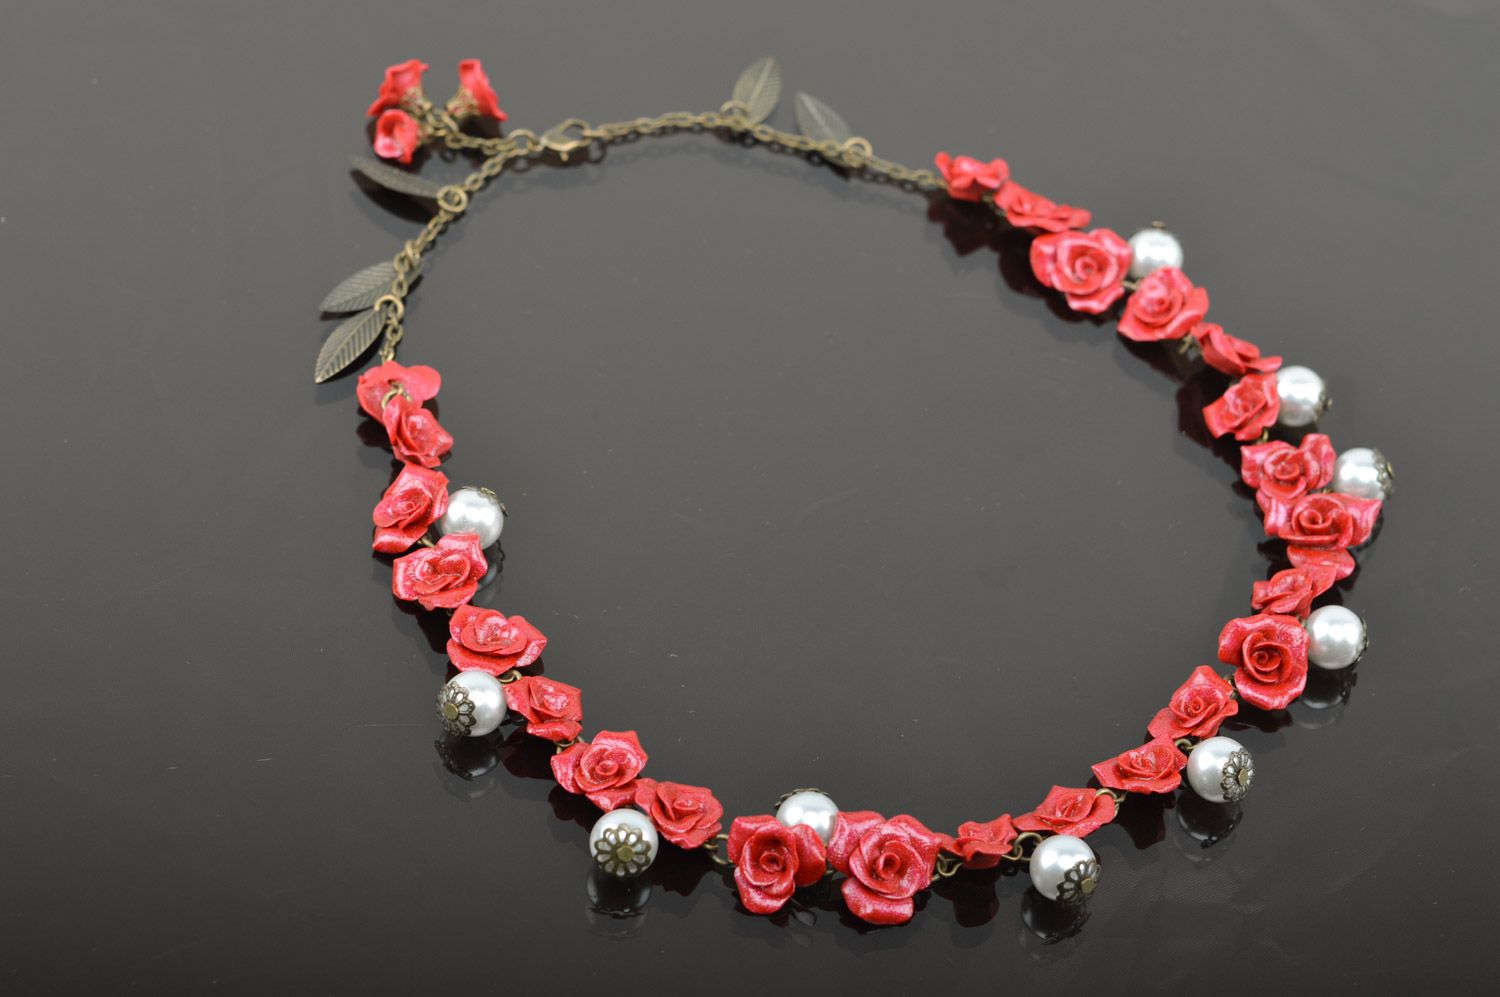 Handmade women's necklace with metal chain and polymer clay roses and beads photo 3